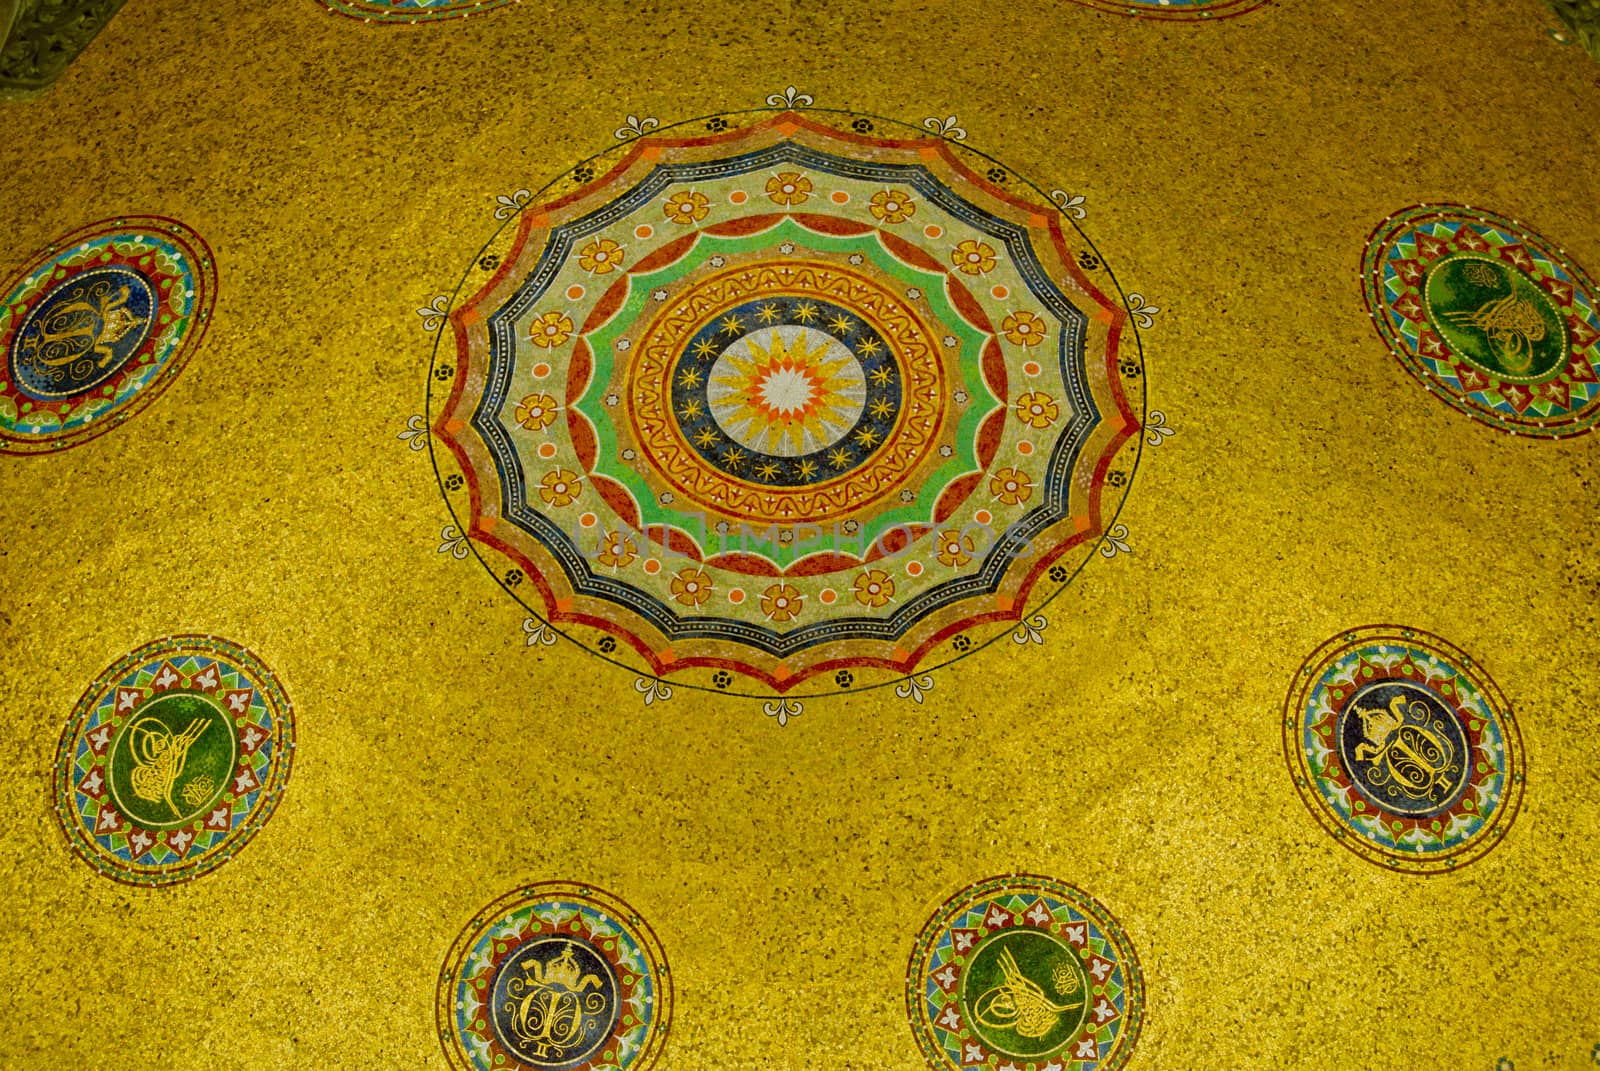 Golden mosaics covering the interior of the dome of the German Fountain in Istanbul.  The monument was erected in 1898 to mark the visit of Emperor Wilhelm II to the city and to celebrate Prussian / Ottoman relations.